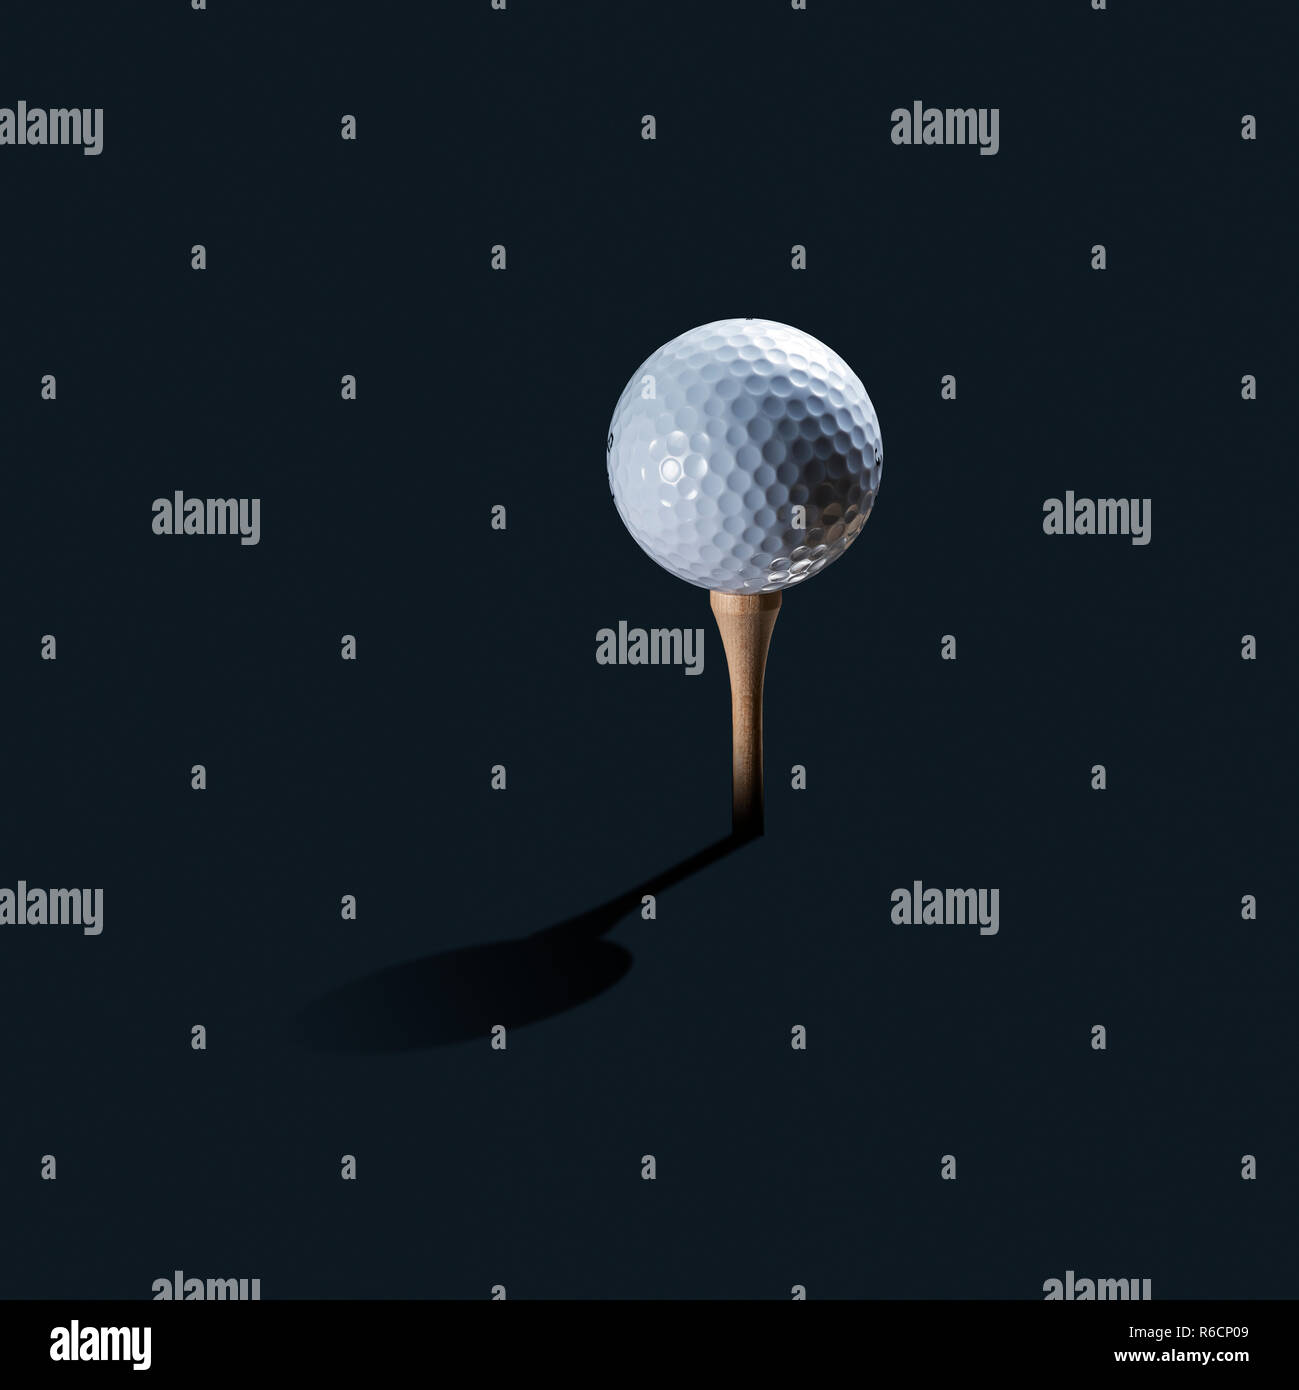 White golf ball on wooden tee as still life with shadow and dark background Stock Photo